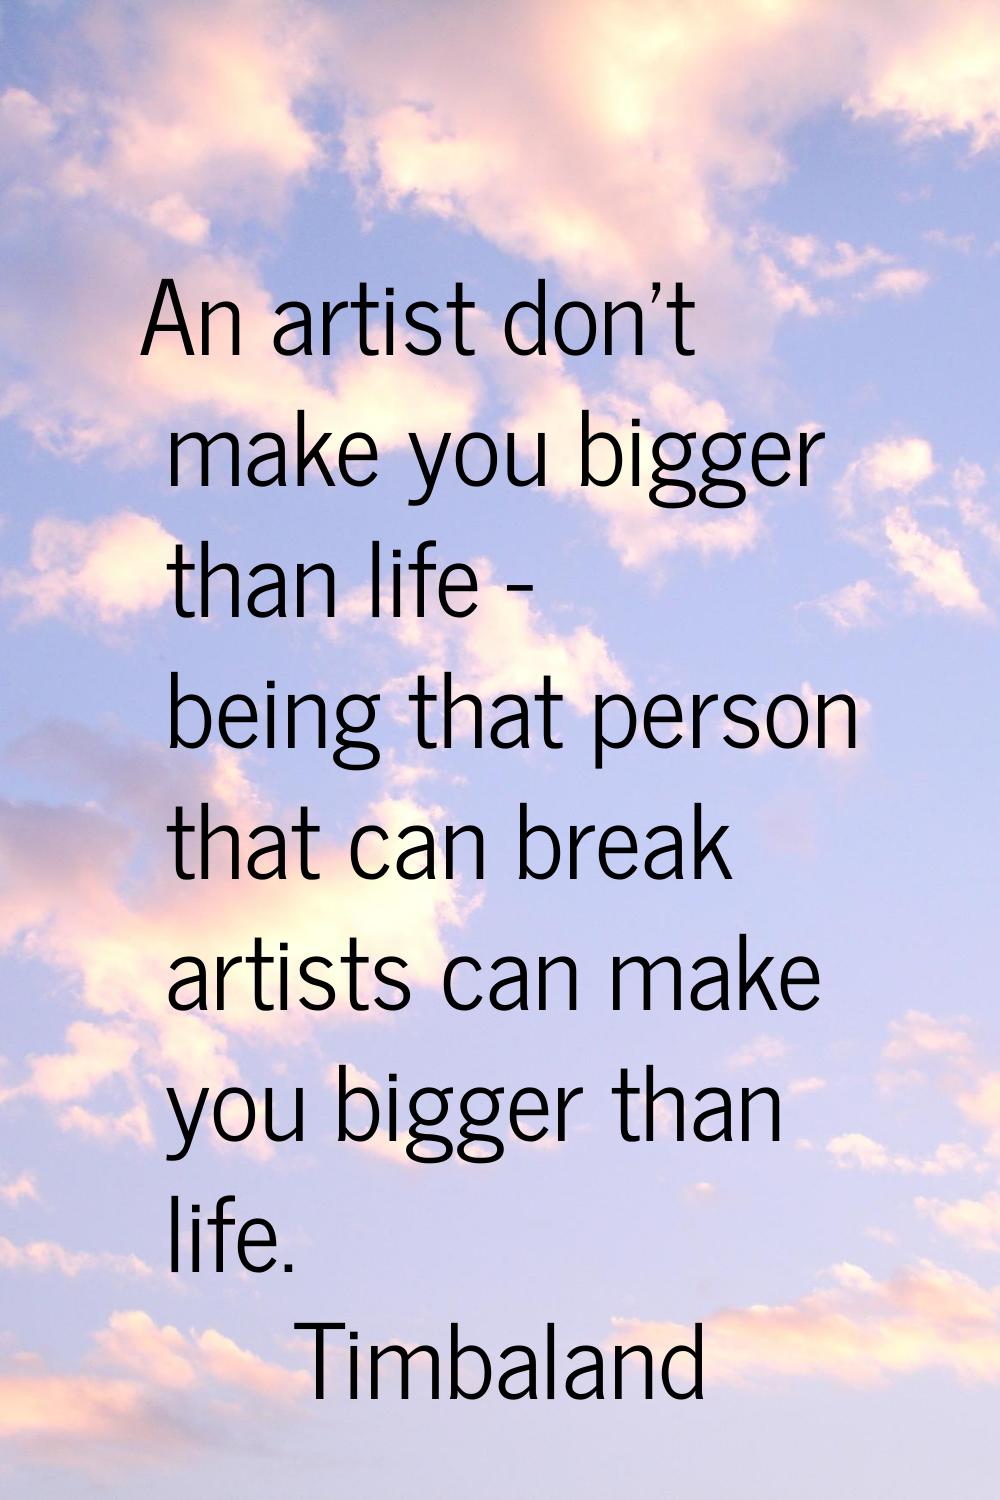 An artist don't make you bigger than life - being that person that can break artists can make you b